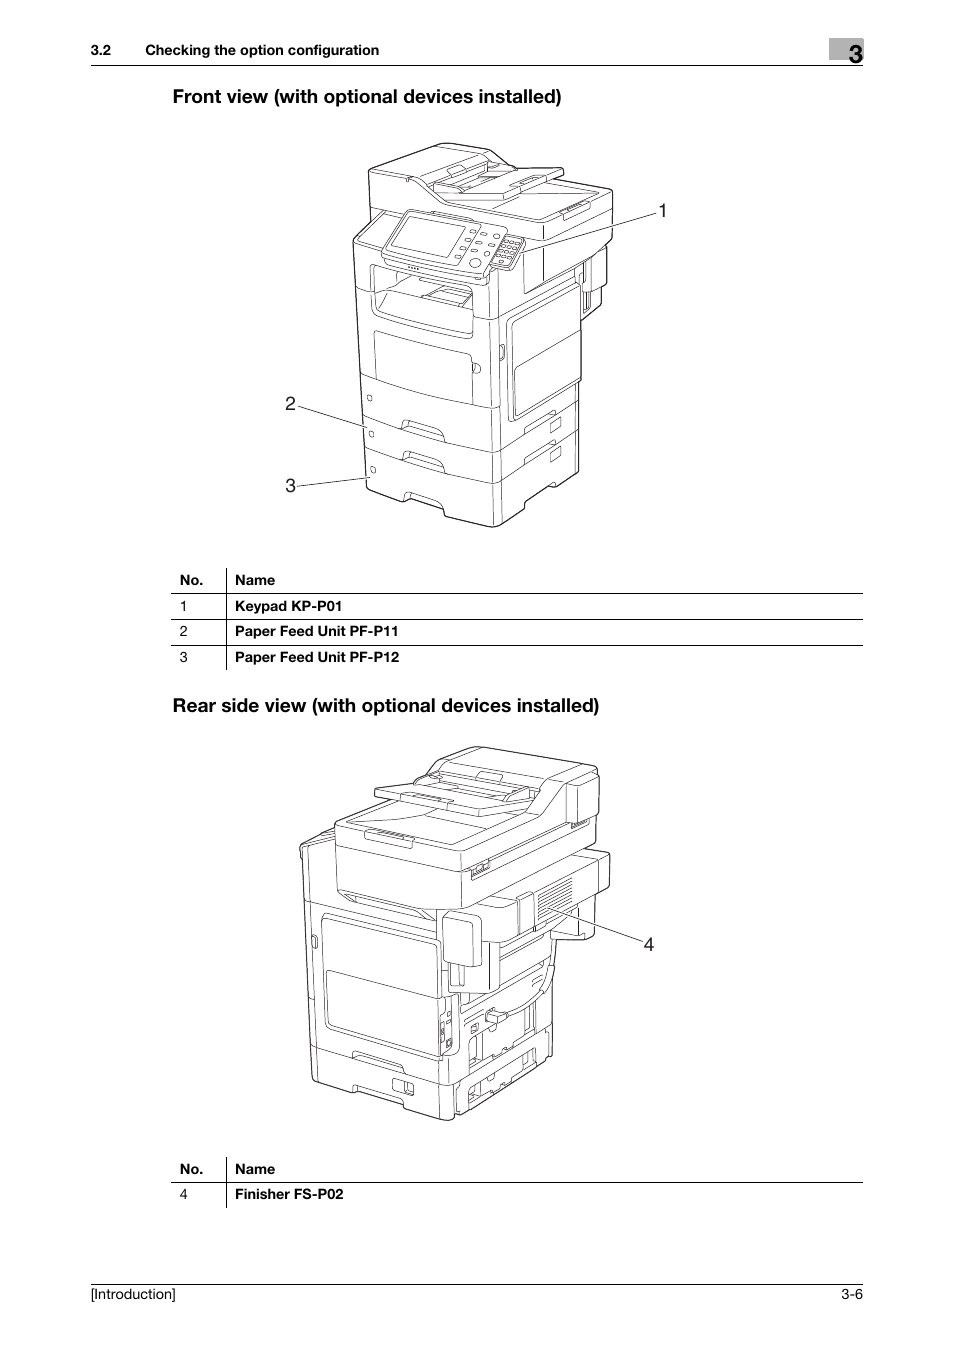 Front view (with optional devices installed), Rear side view (with optional devices installed) | Konica Minolta bizhub 4050 User Manual | Page 25 / 86